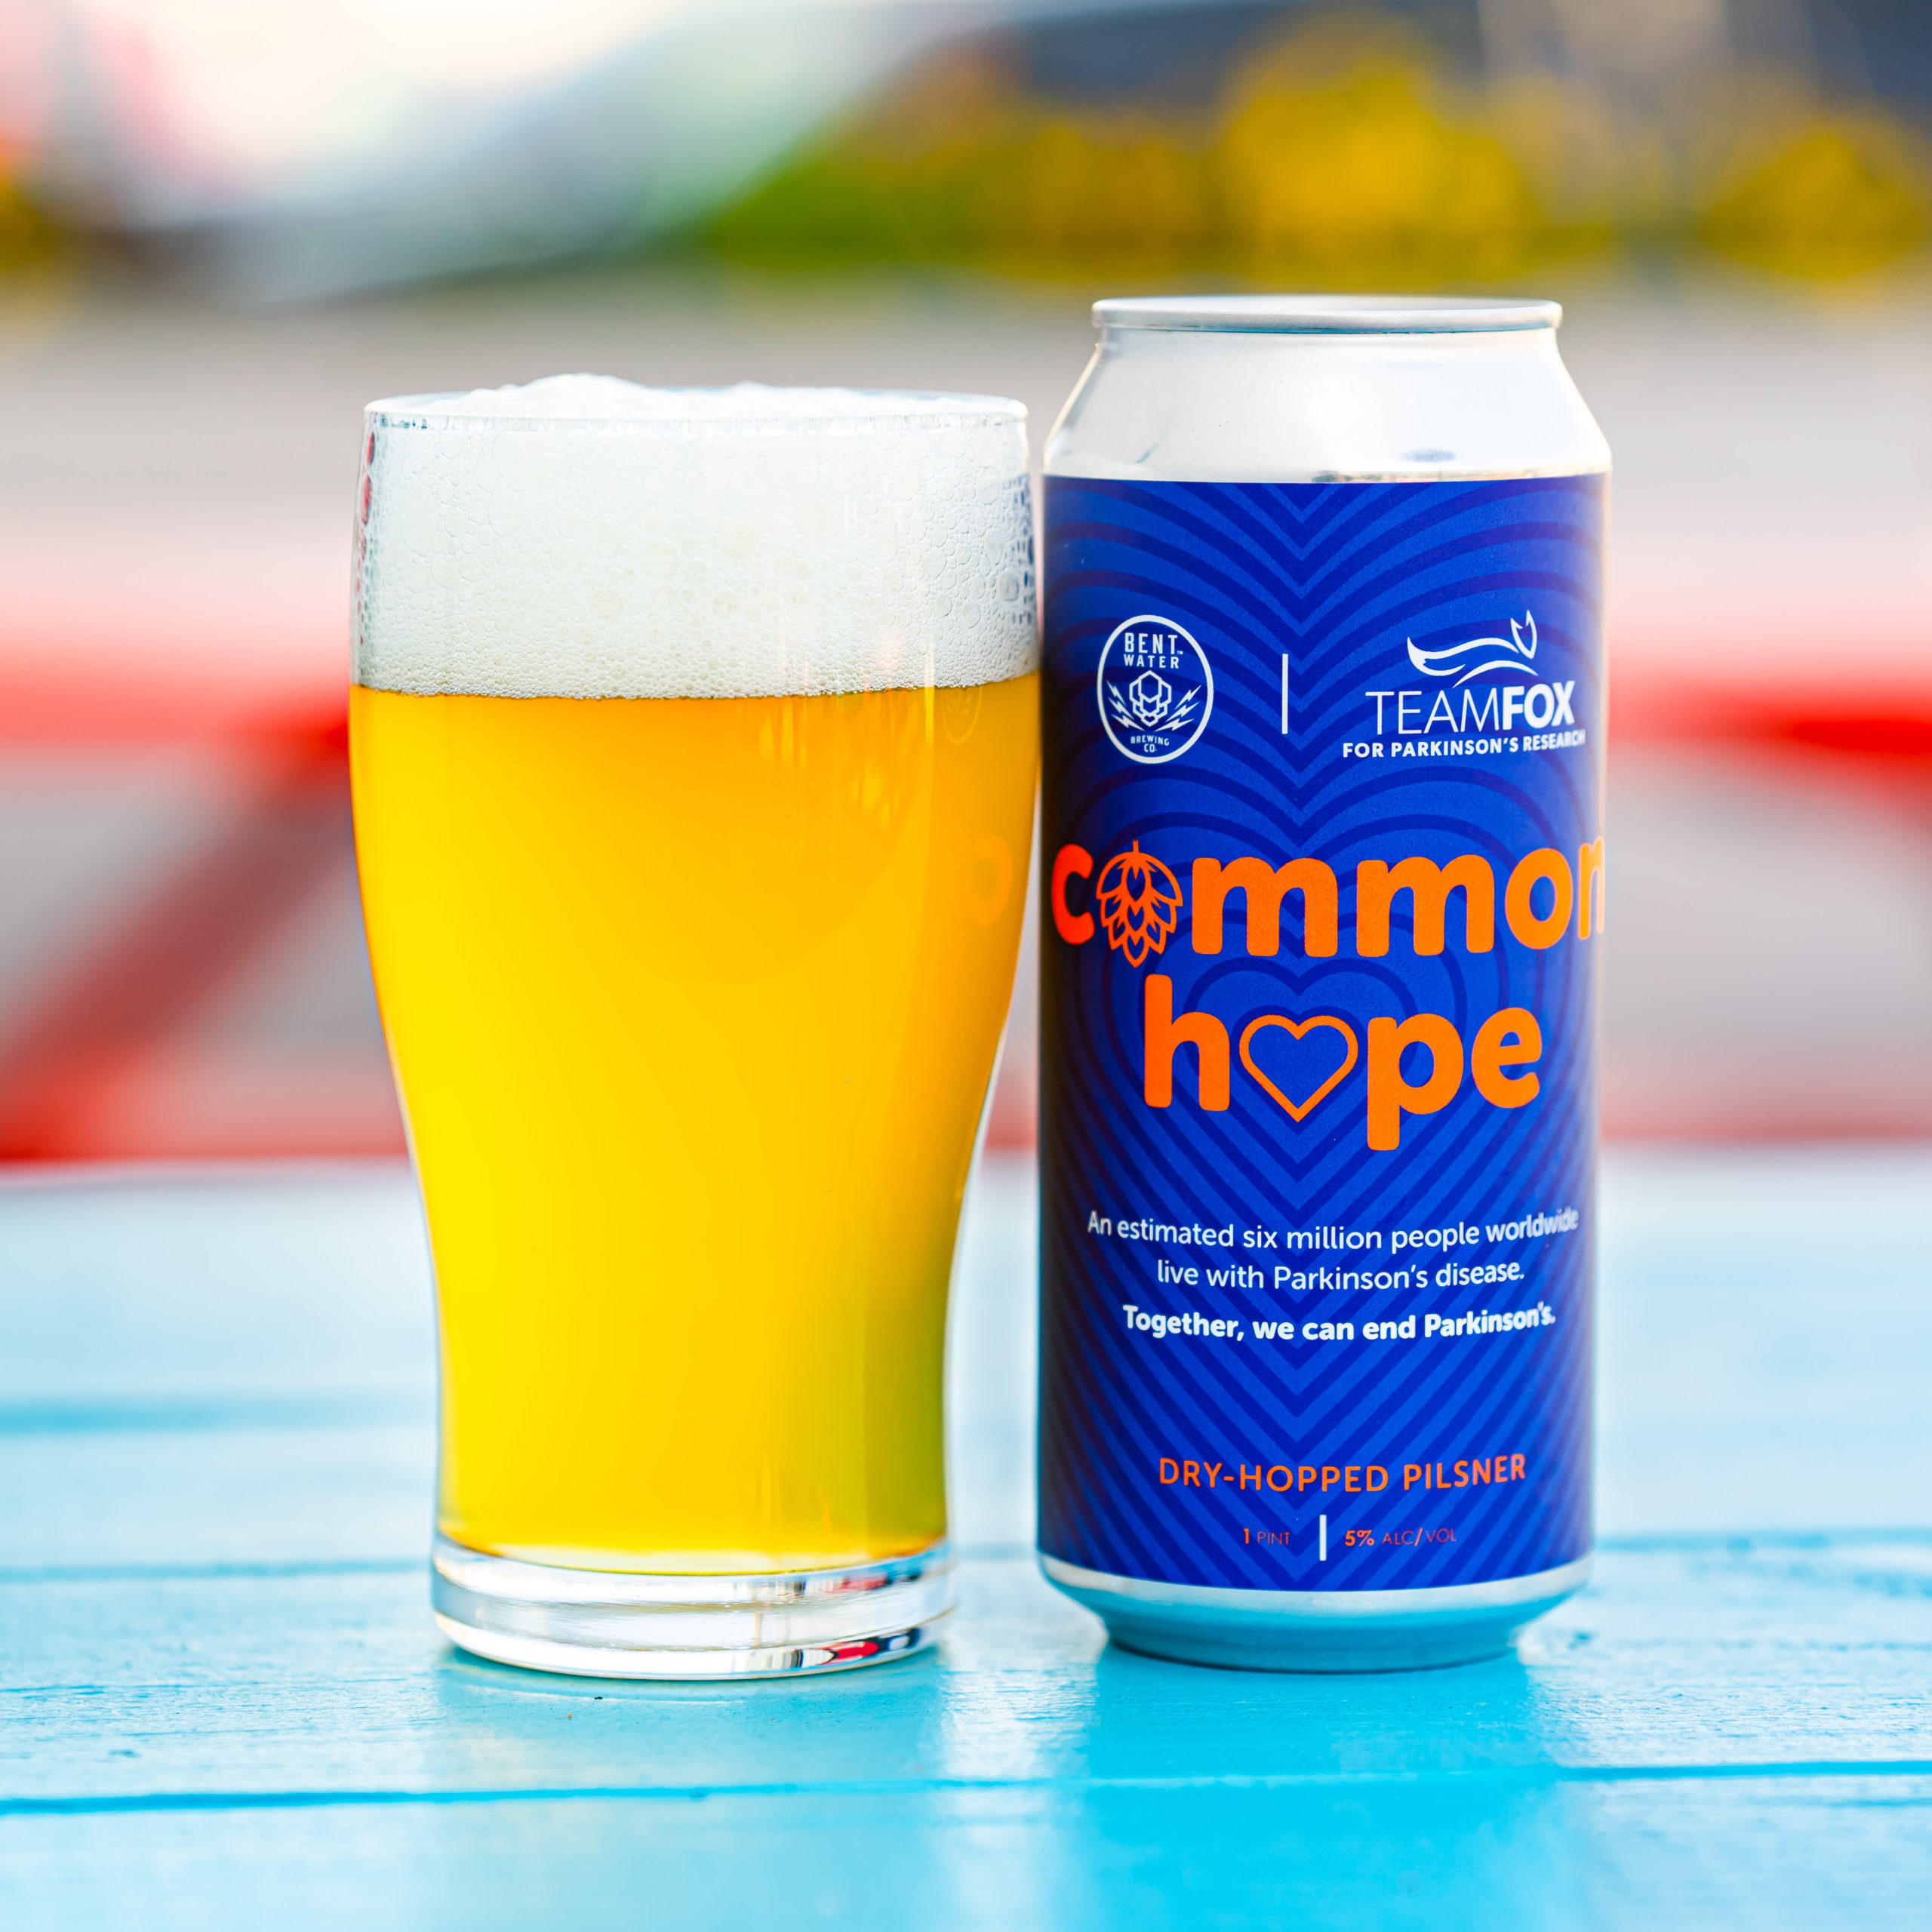 Common Hope beer image 1